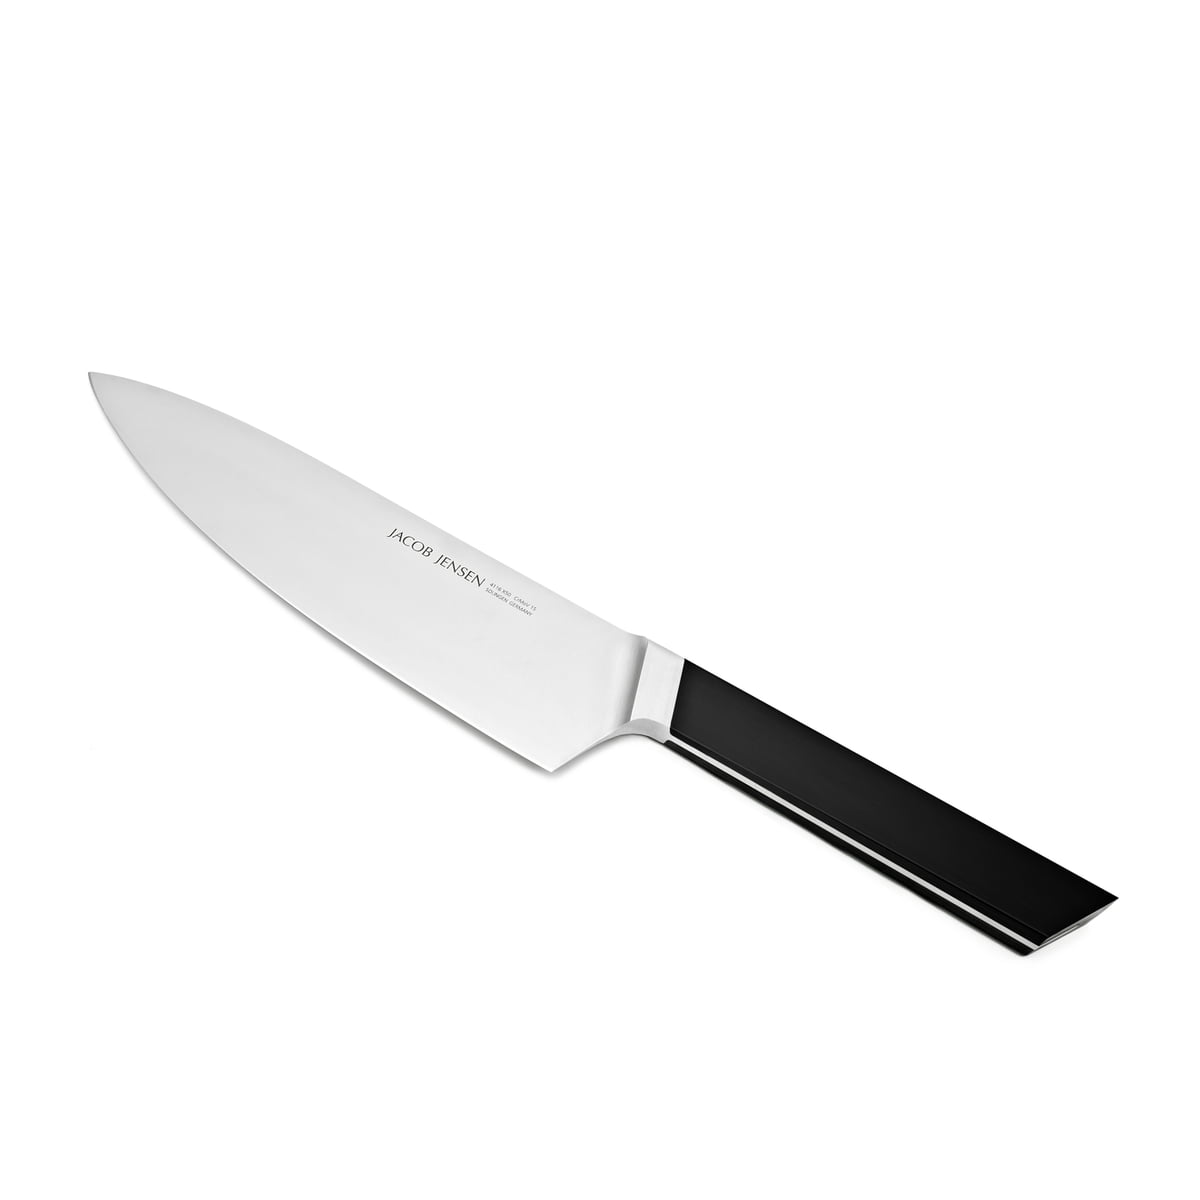 The Jacob Jensen Chefs Knife In The Home Deisgn Shop